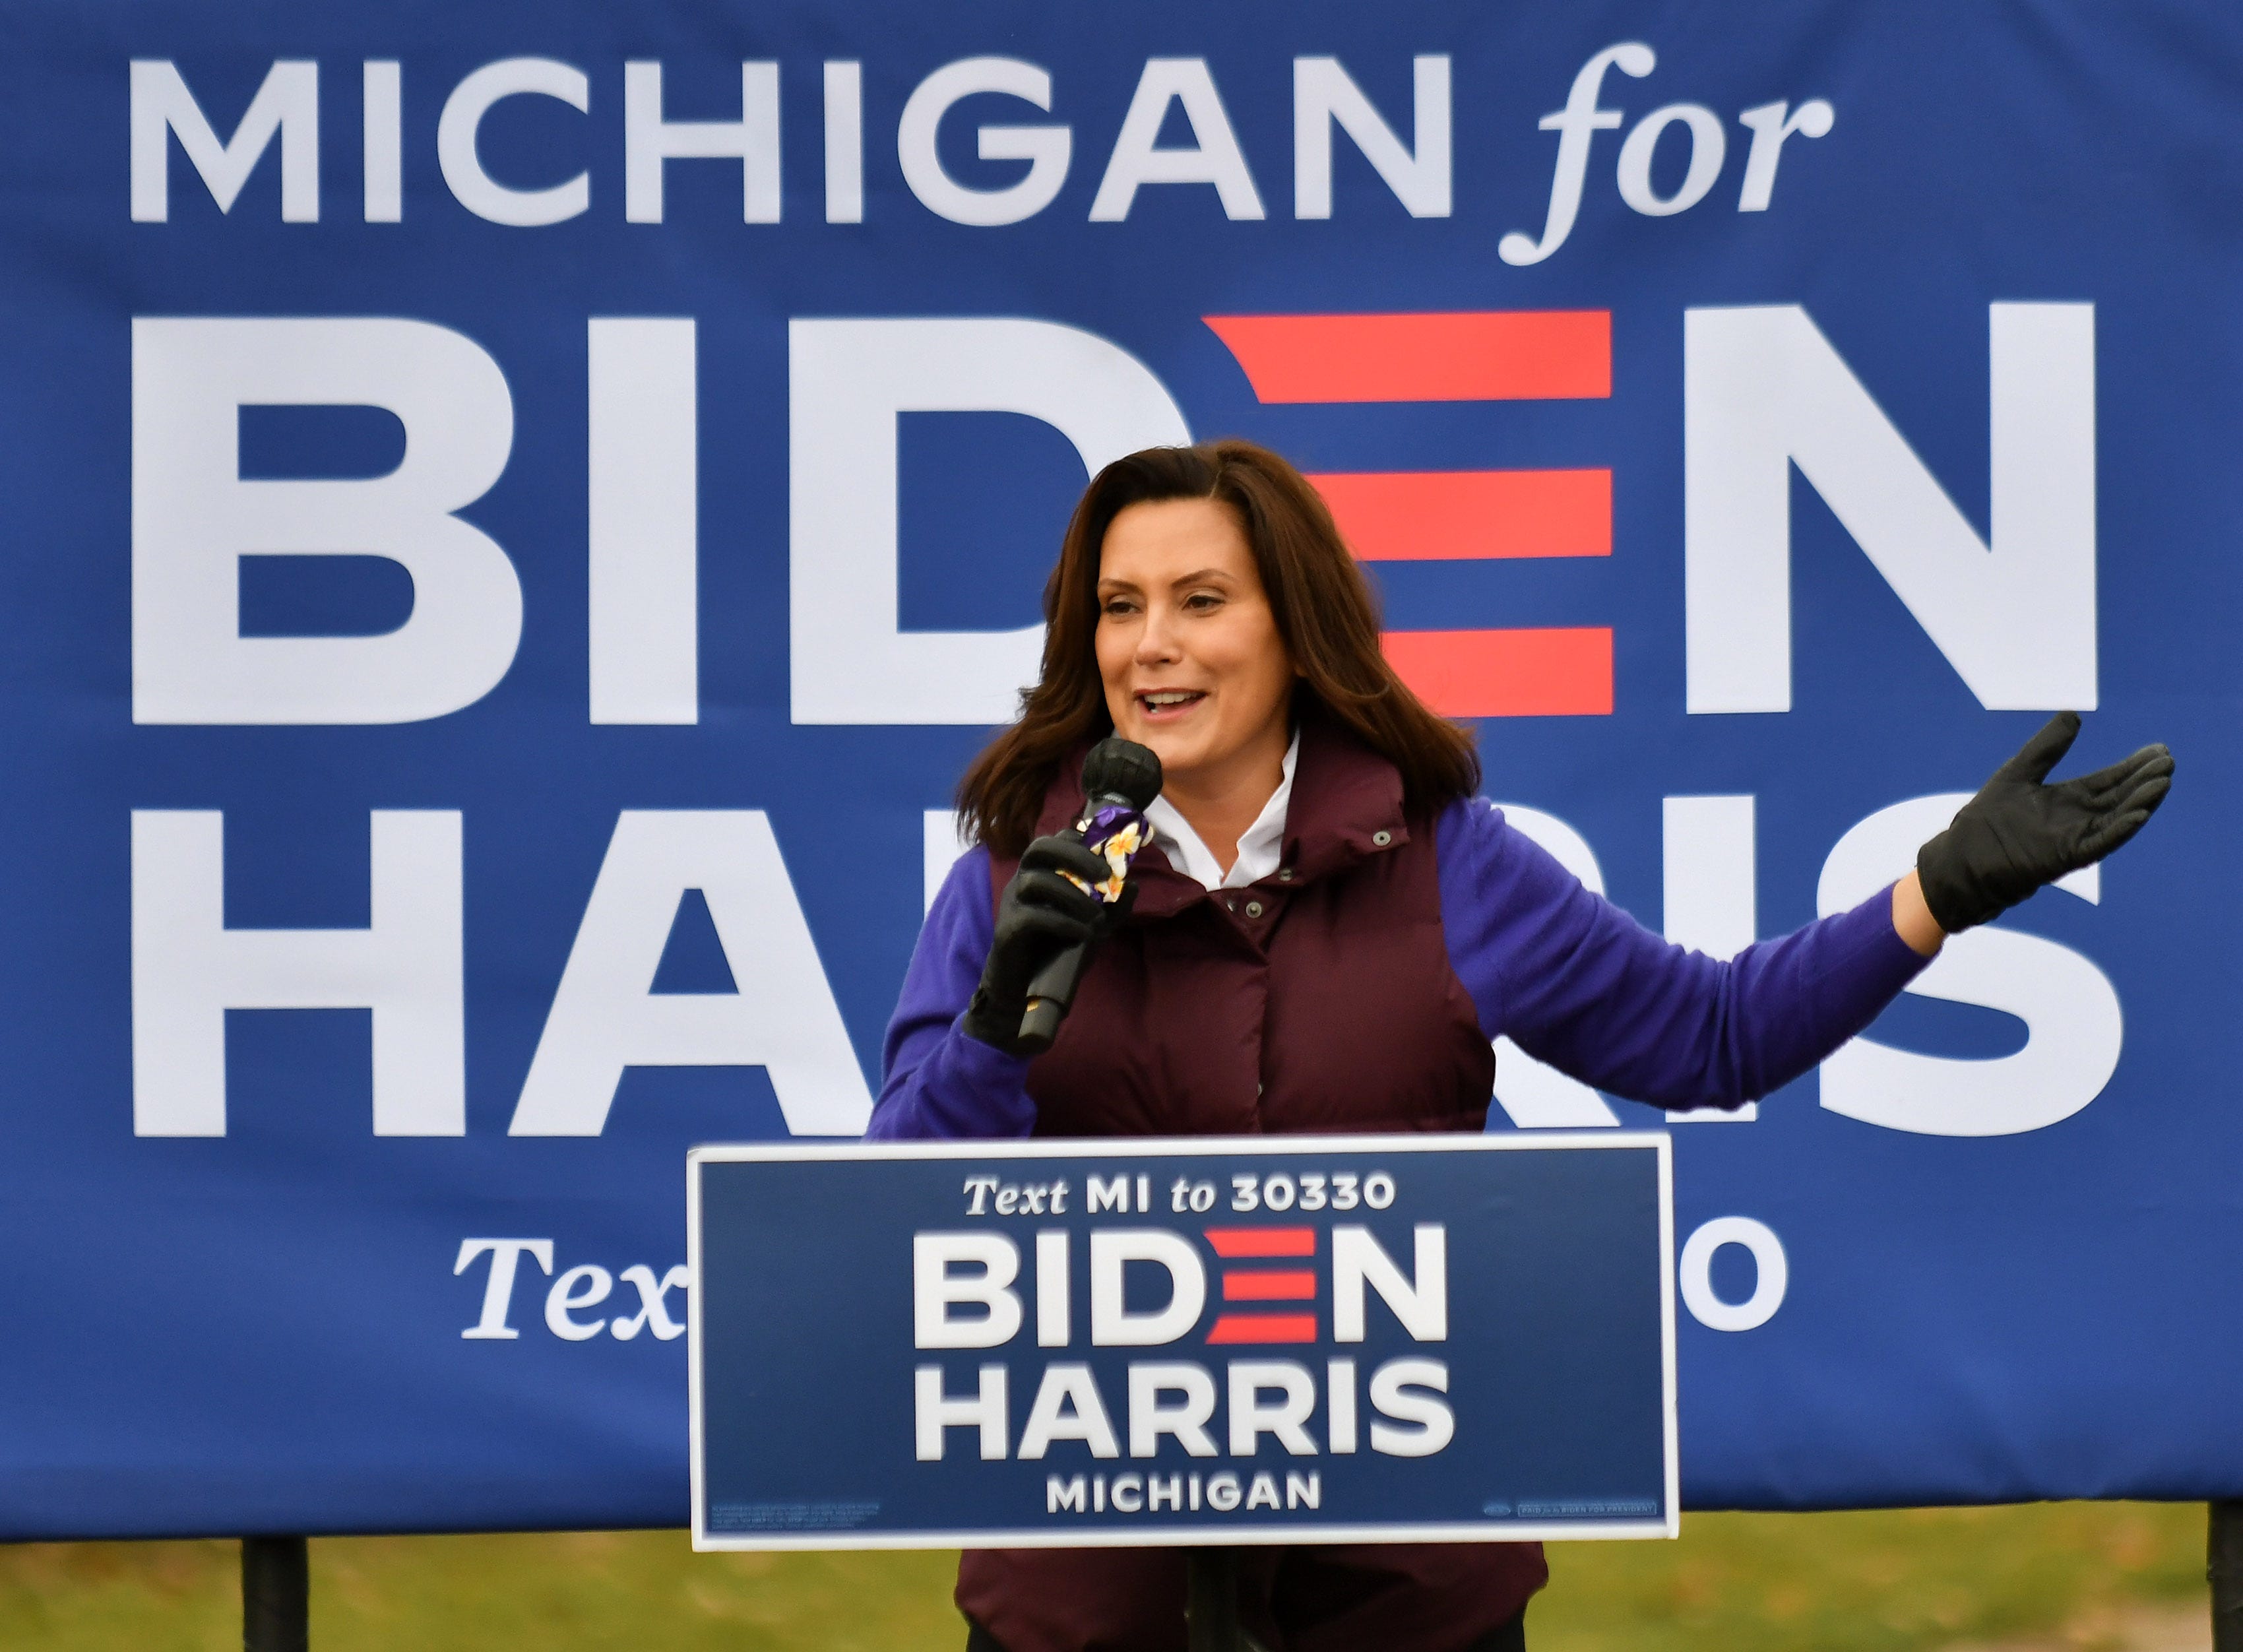 Gov. Gretchen Whitmer speaks before Democratic vice presidential candidate Sen. Kamala Harris at the Canvass Kickoff event at the Troy Community Center in Troy, Mich. in Detroit on Oct. 25, 2020.